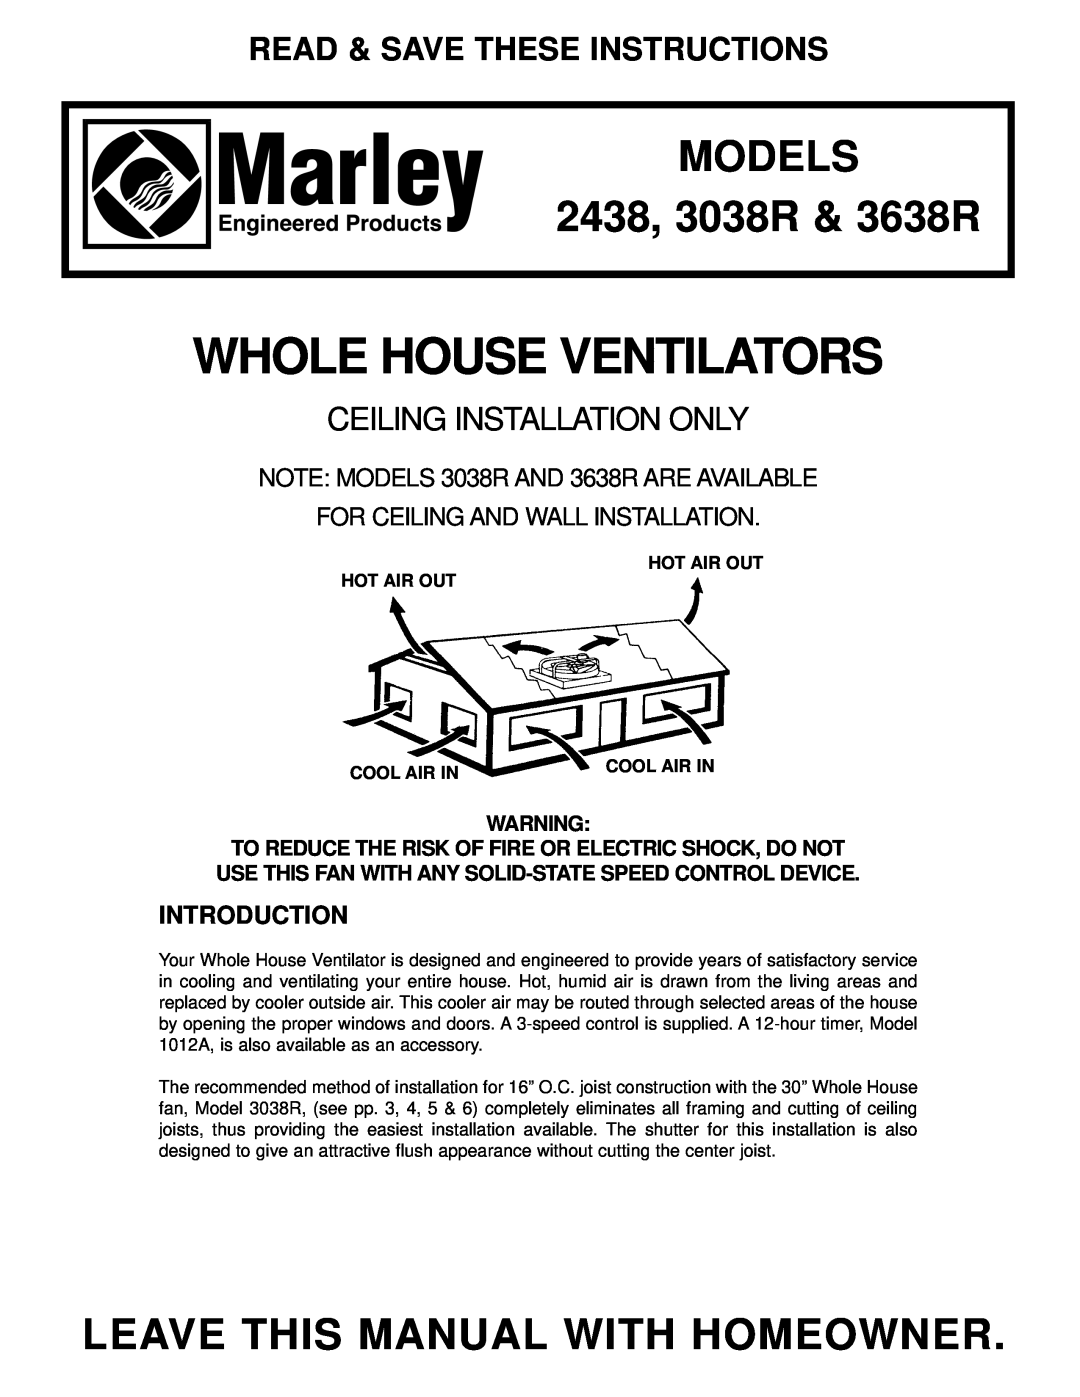 Marley Engineered Products 3638R, 2438, 3038R manual Read & Save These Instructions, Introduction, Whole House Ventilators 